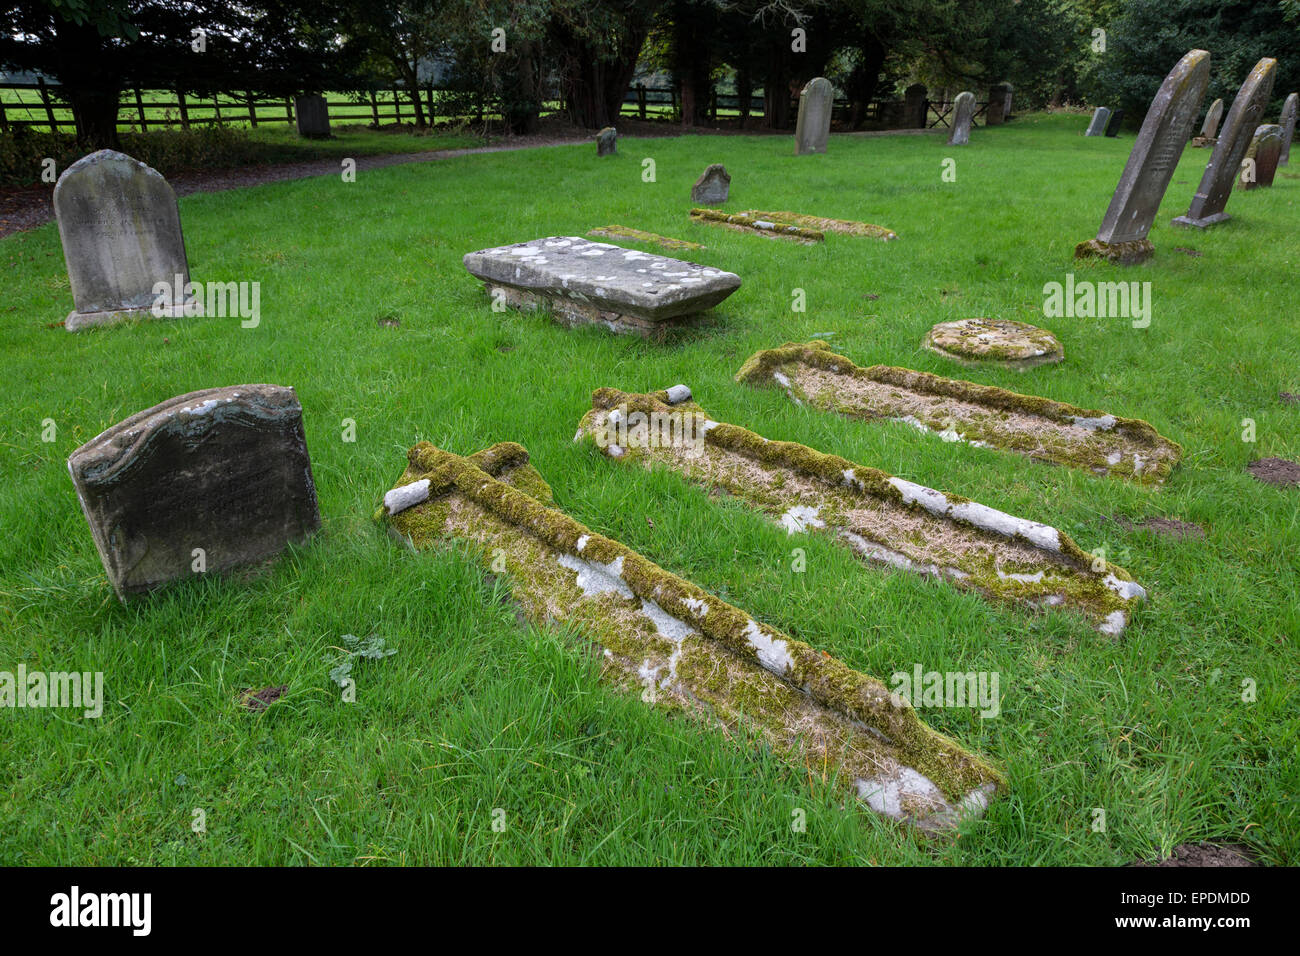 UK, England, Yorkshire.  Gravestones in the Cemetery of St. Oswald's Church, Built around 1200 A.D. Stock Photo